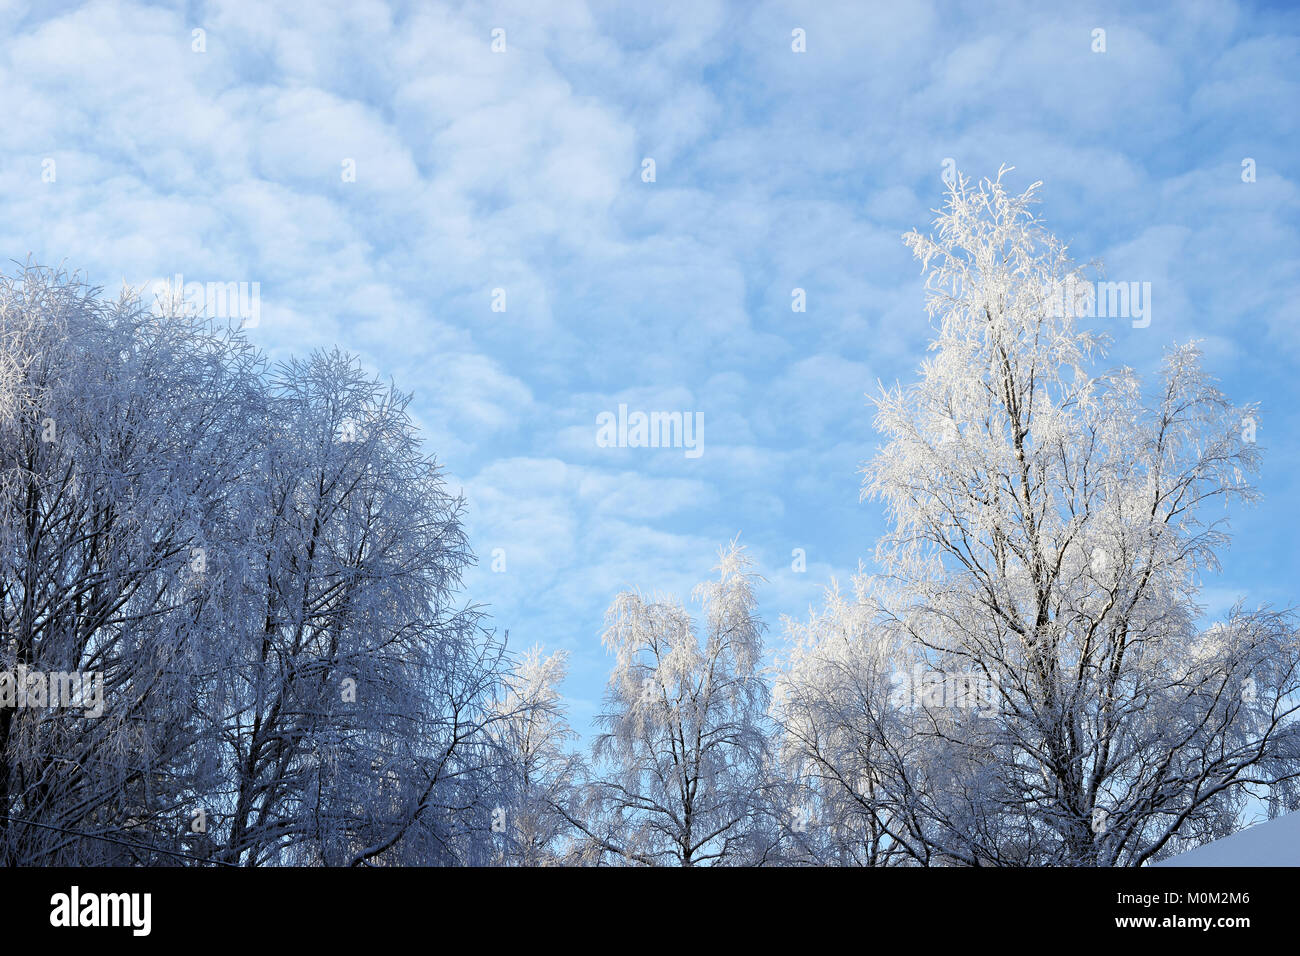 Snow covered branches with room for text on sky. Stock Photo